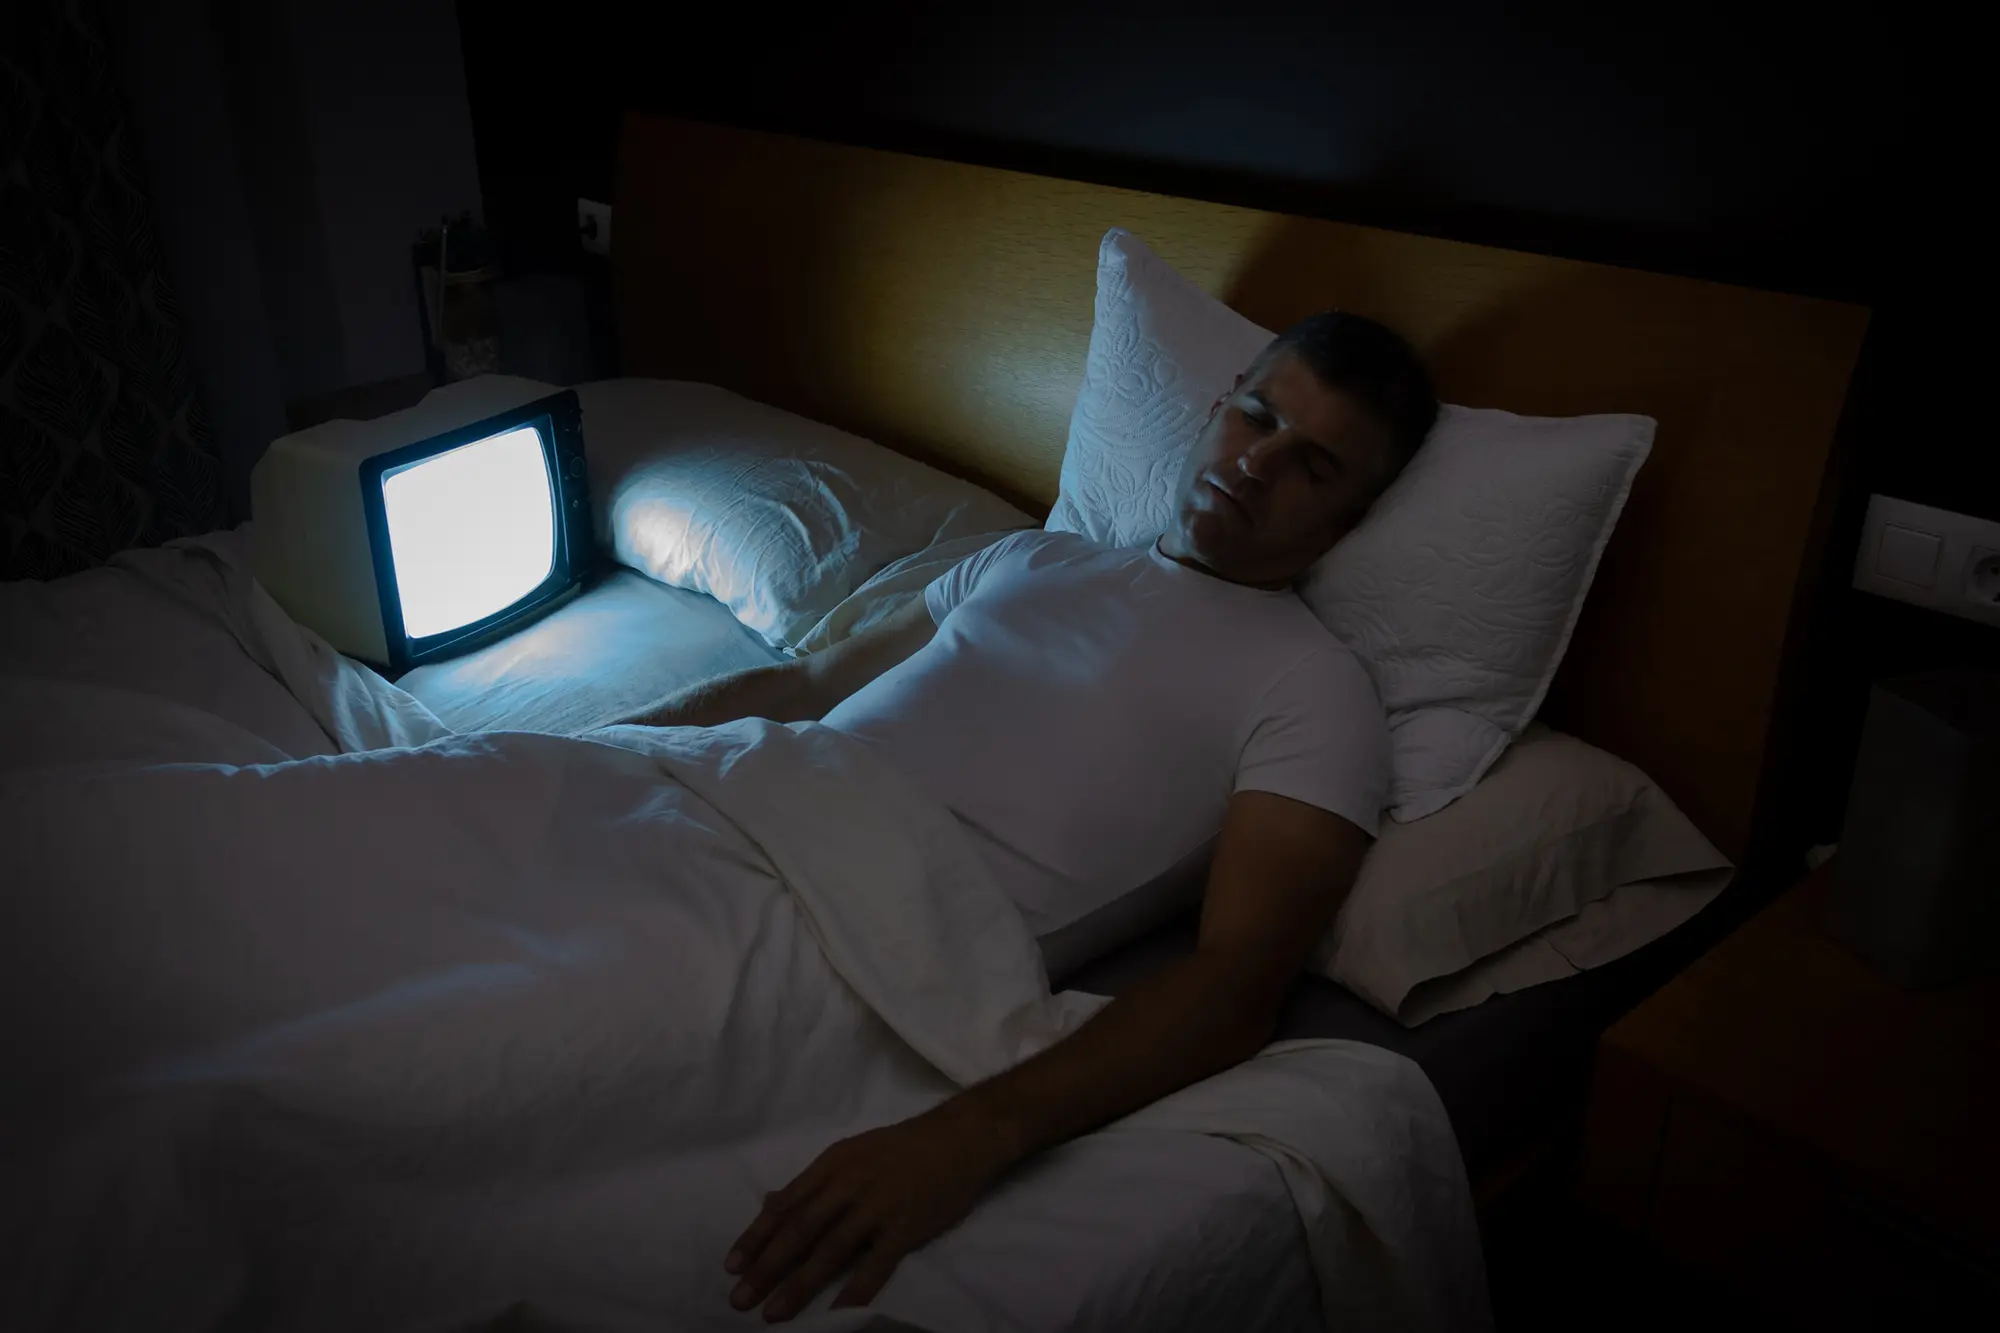 sleeping with light on causes health problems